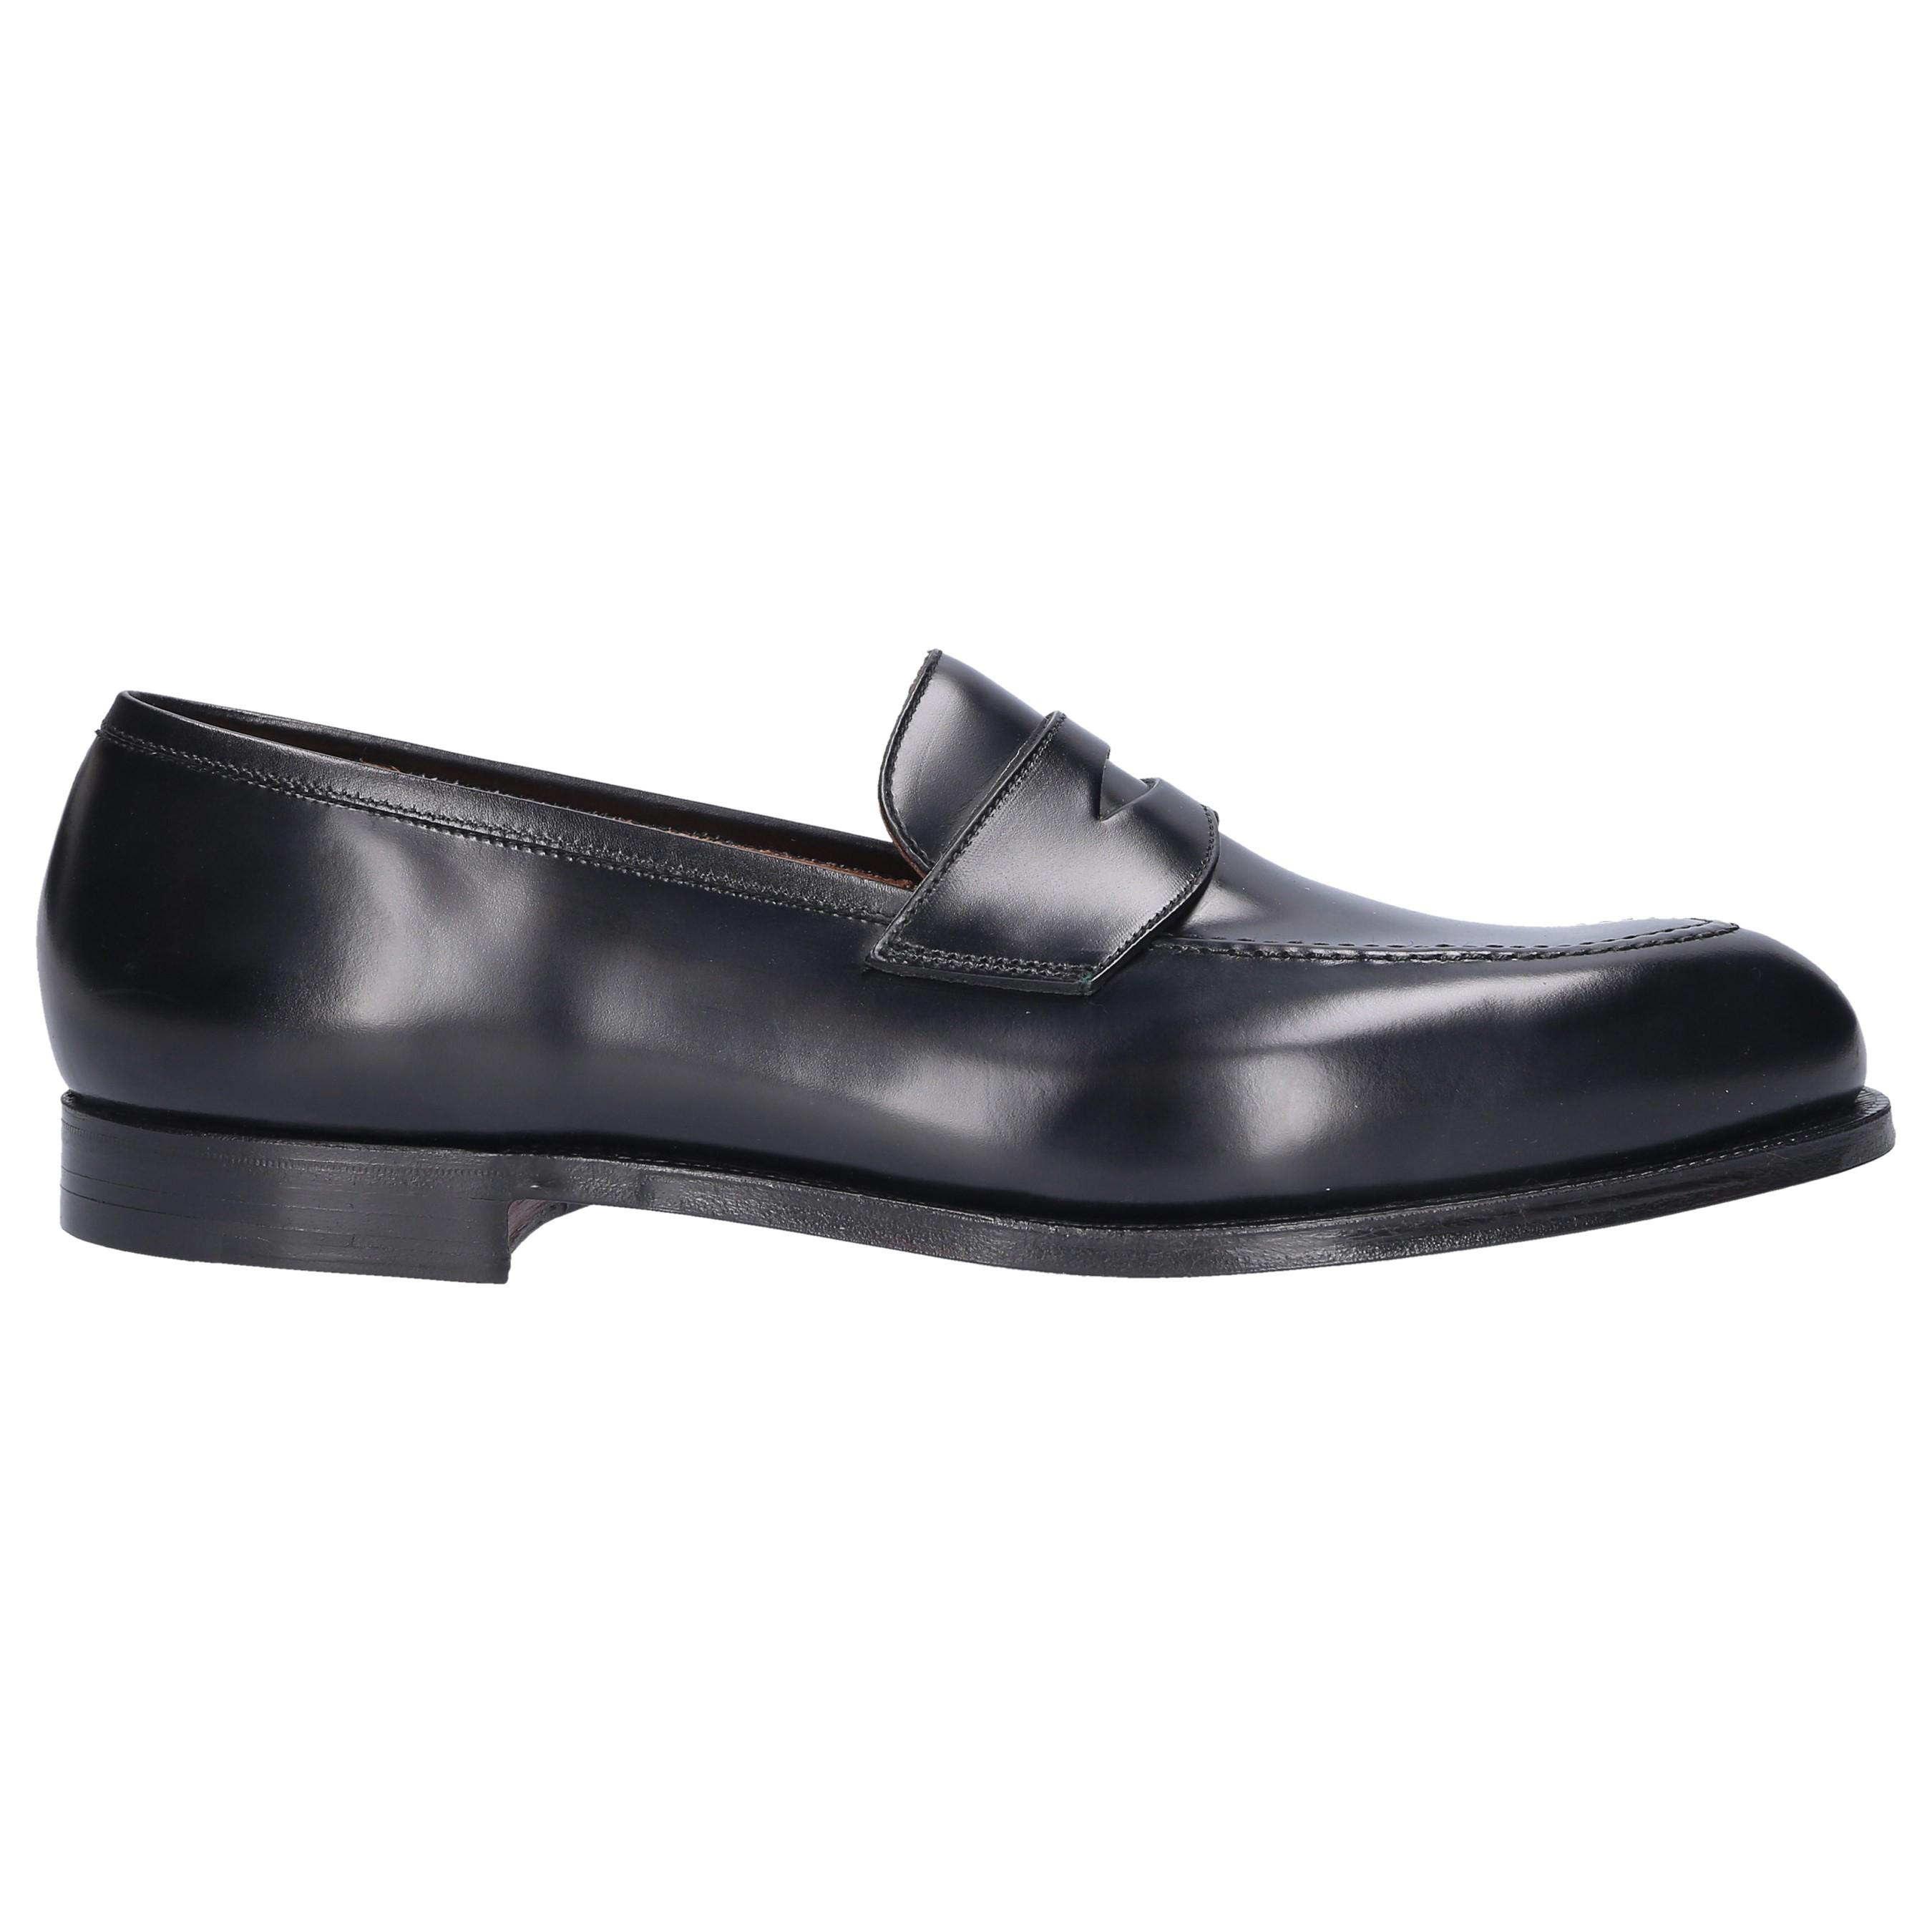 Crockett and Jones Leather Loafers Henley 2 in Black for Men - Lyst